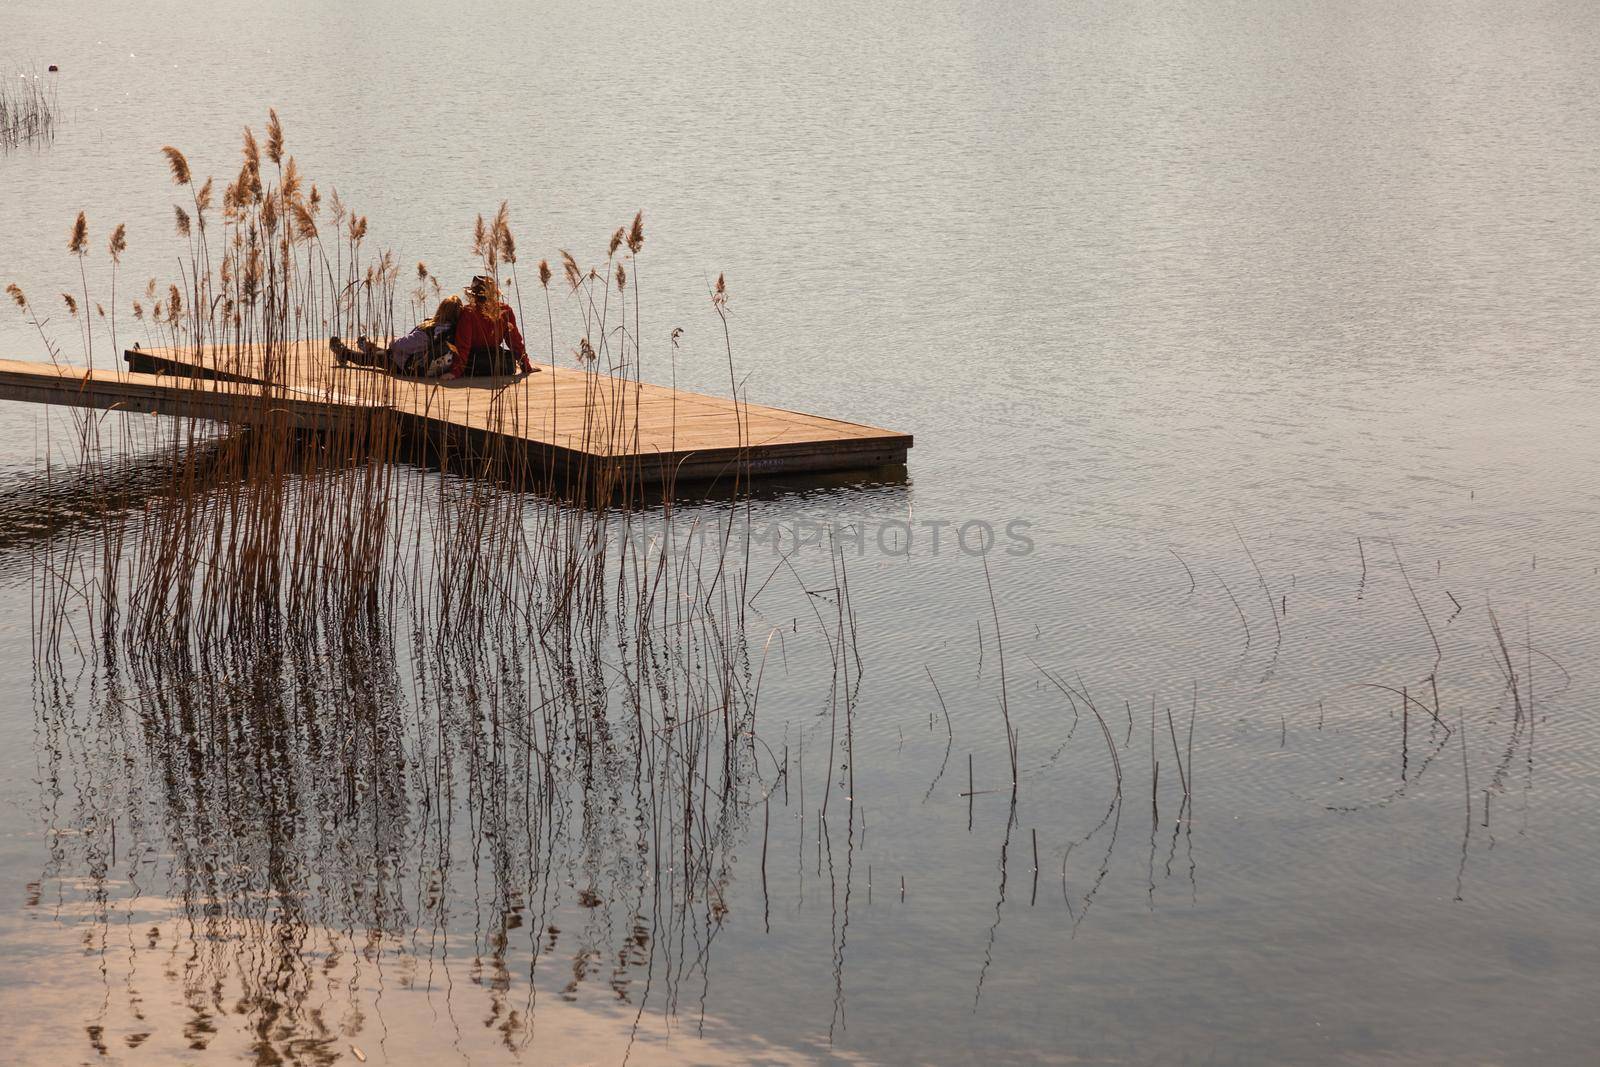 Two aged peoples relaxing at the lake of Annone in italy